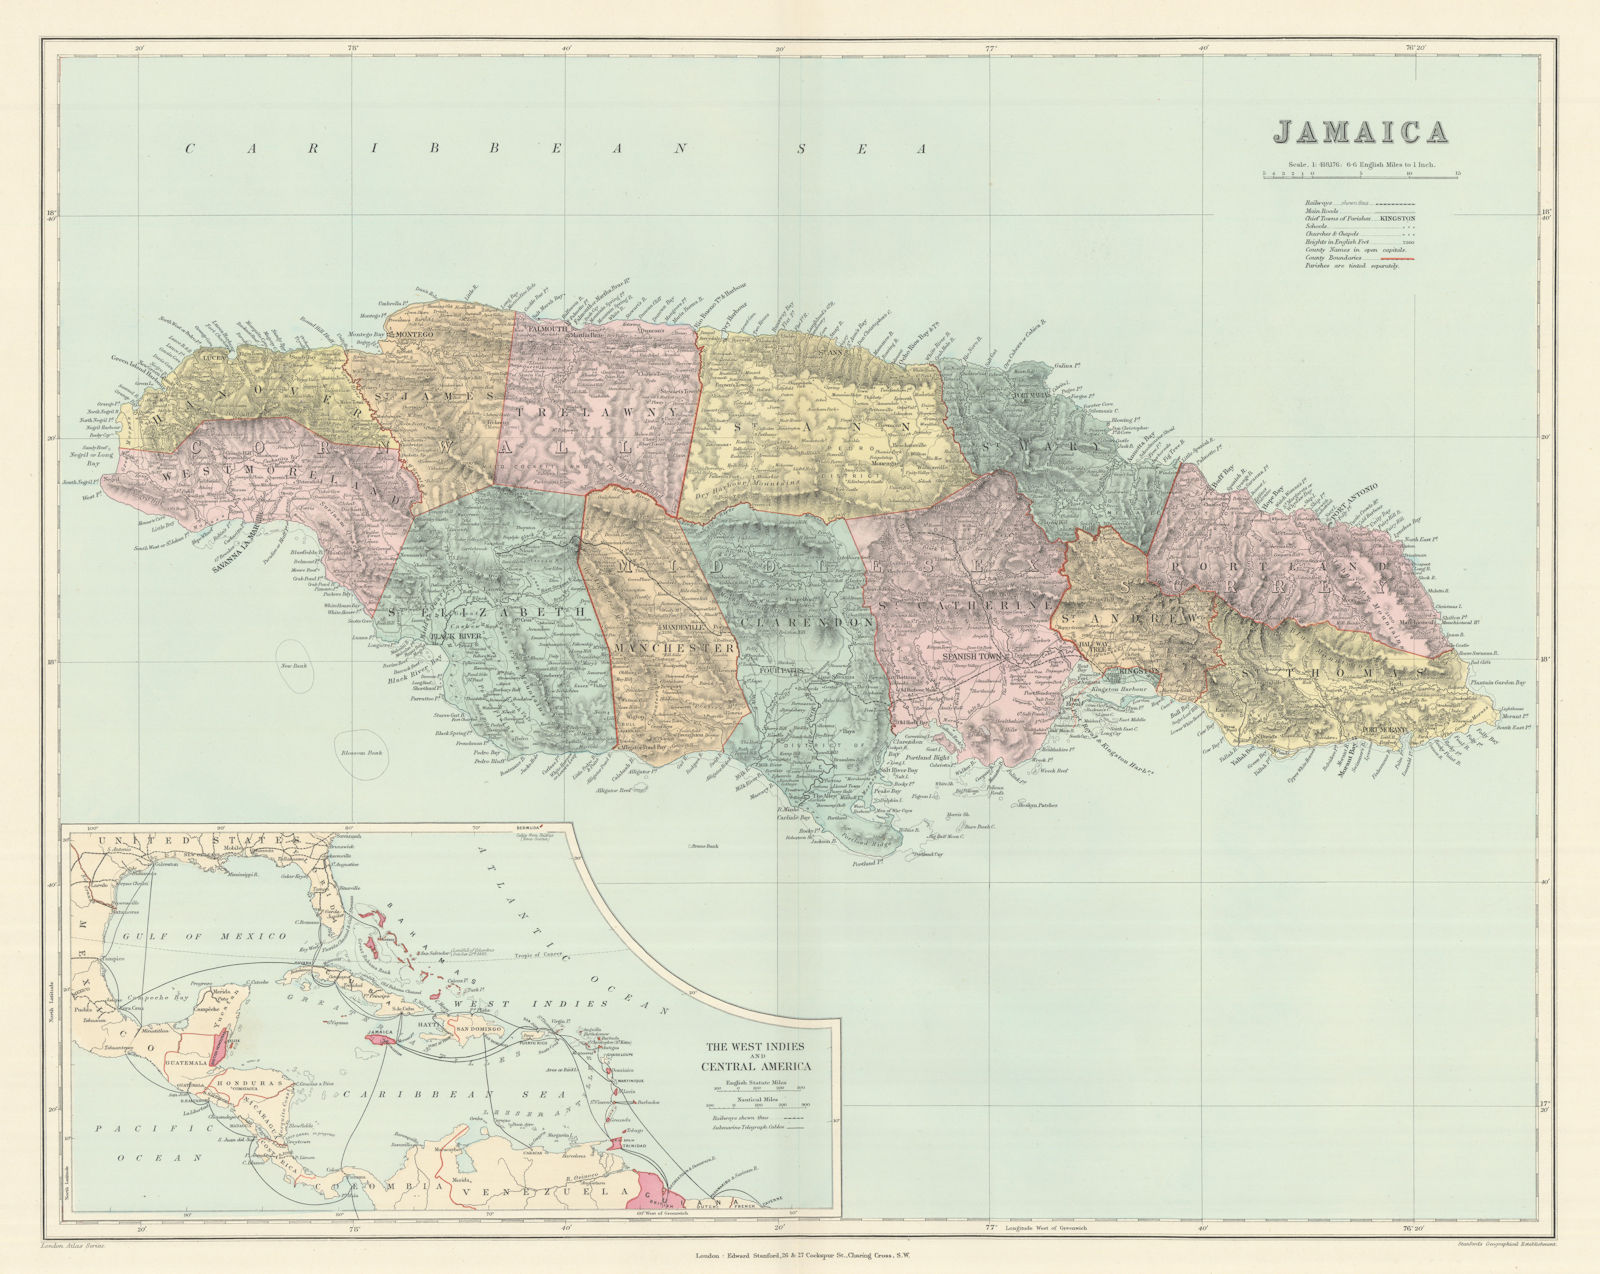 Jamaica, in parishes. West Indies telegraph cables. 51x63cm. STANFORD 1894 map